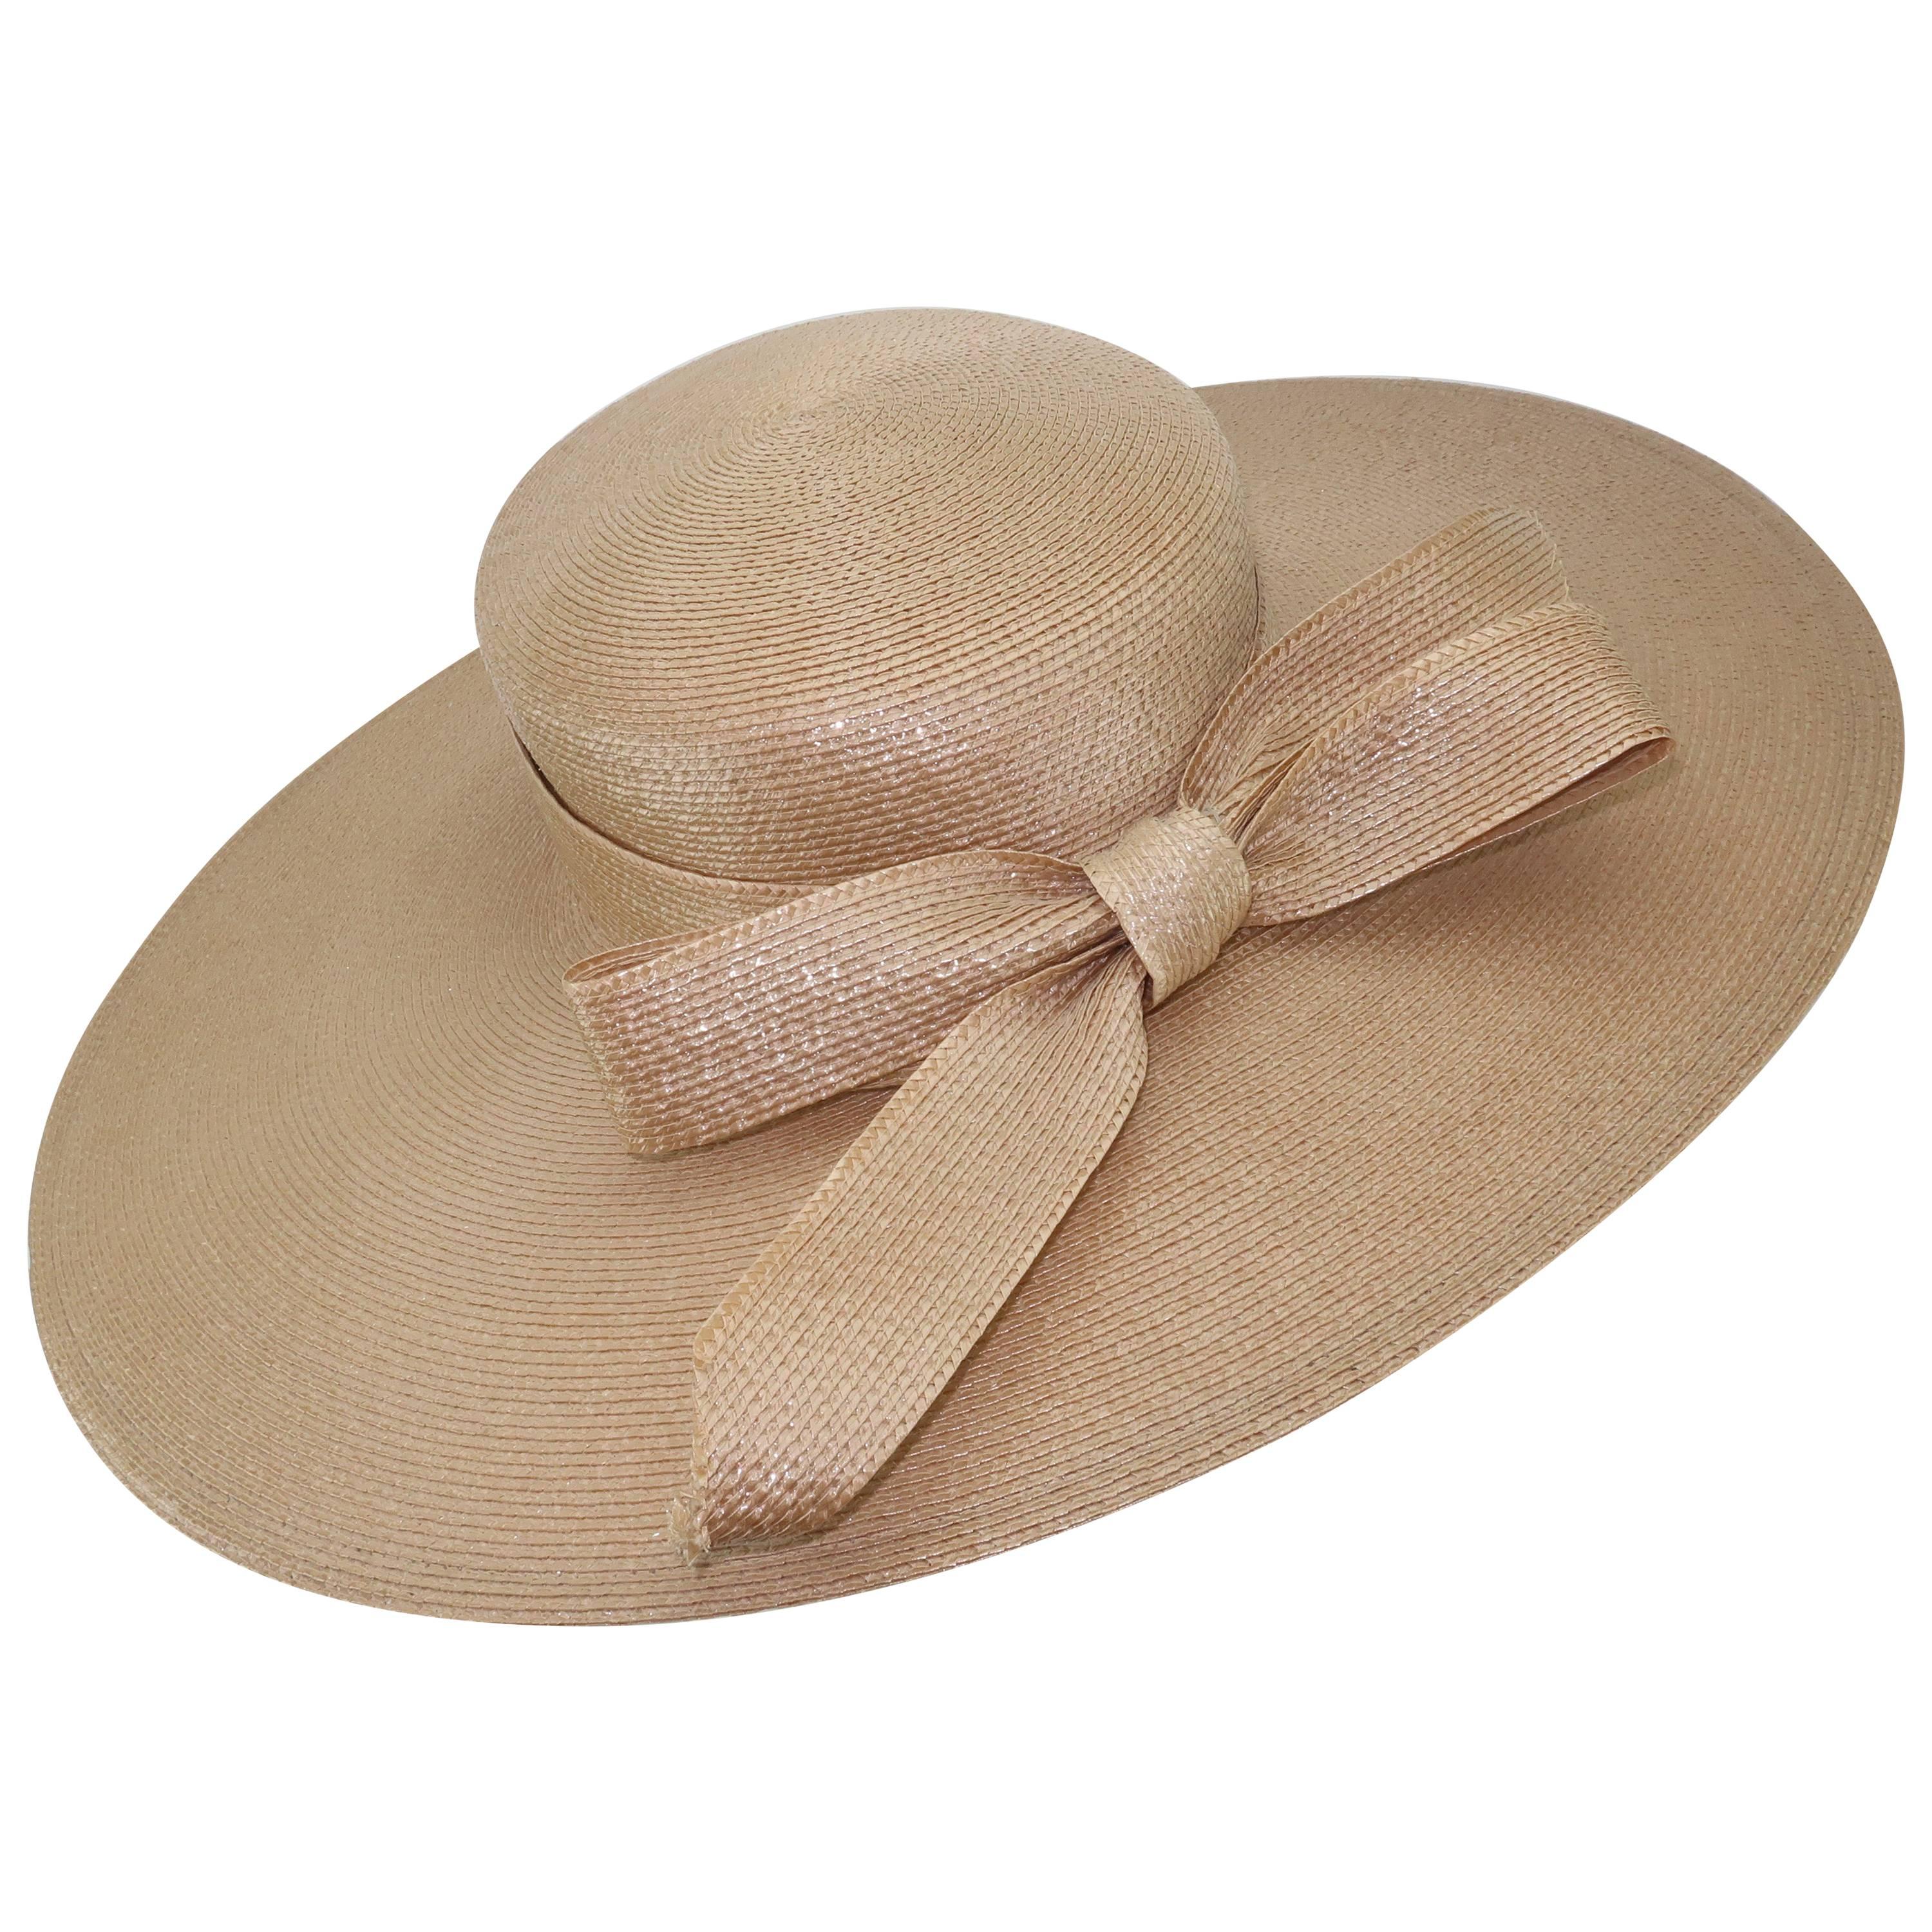 Frank Olive Beige Tone Oval Straw Hat With Bow, 1980s